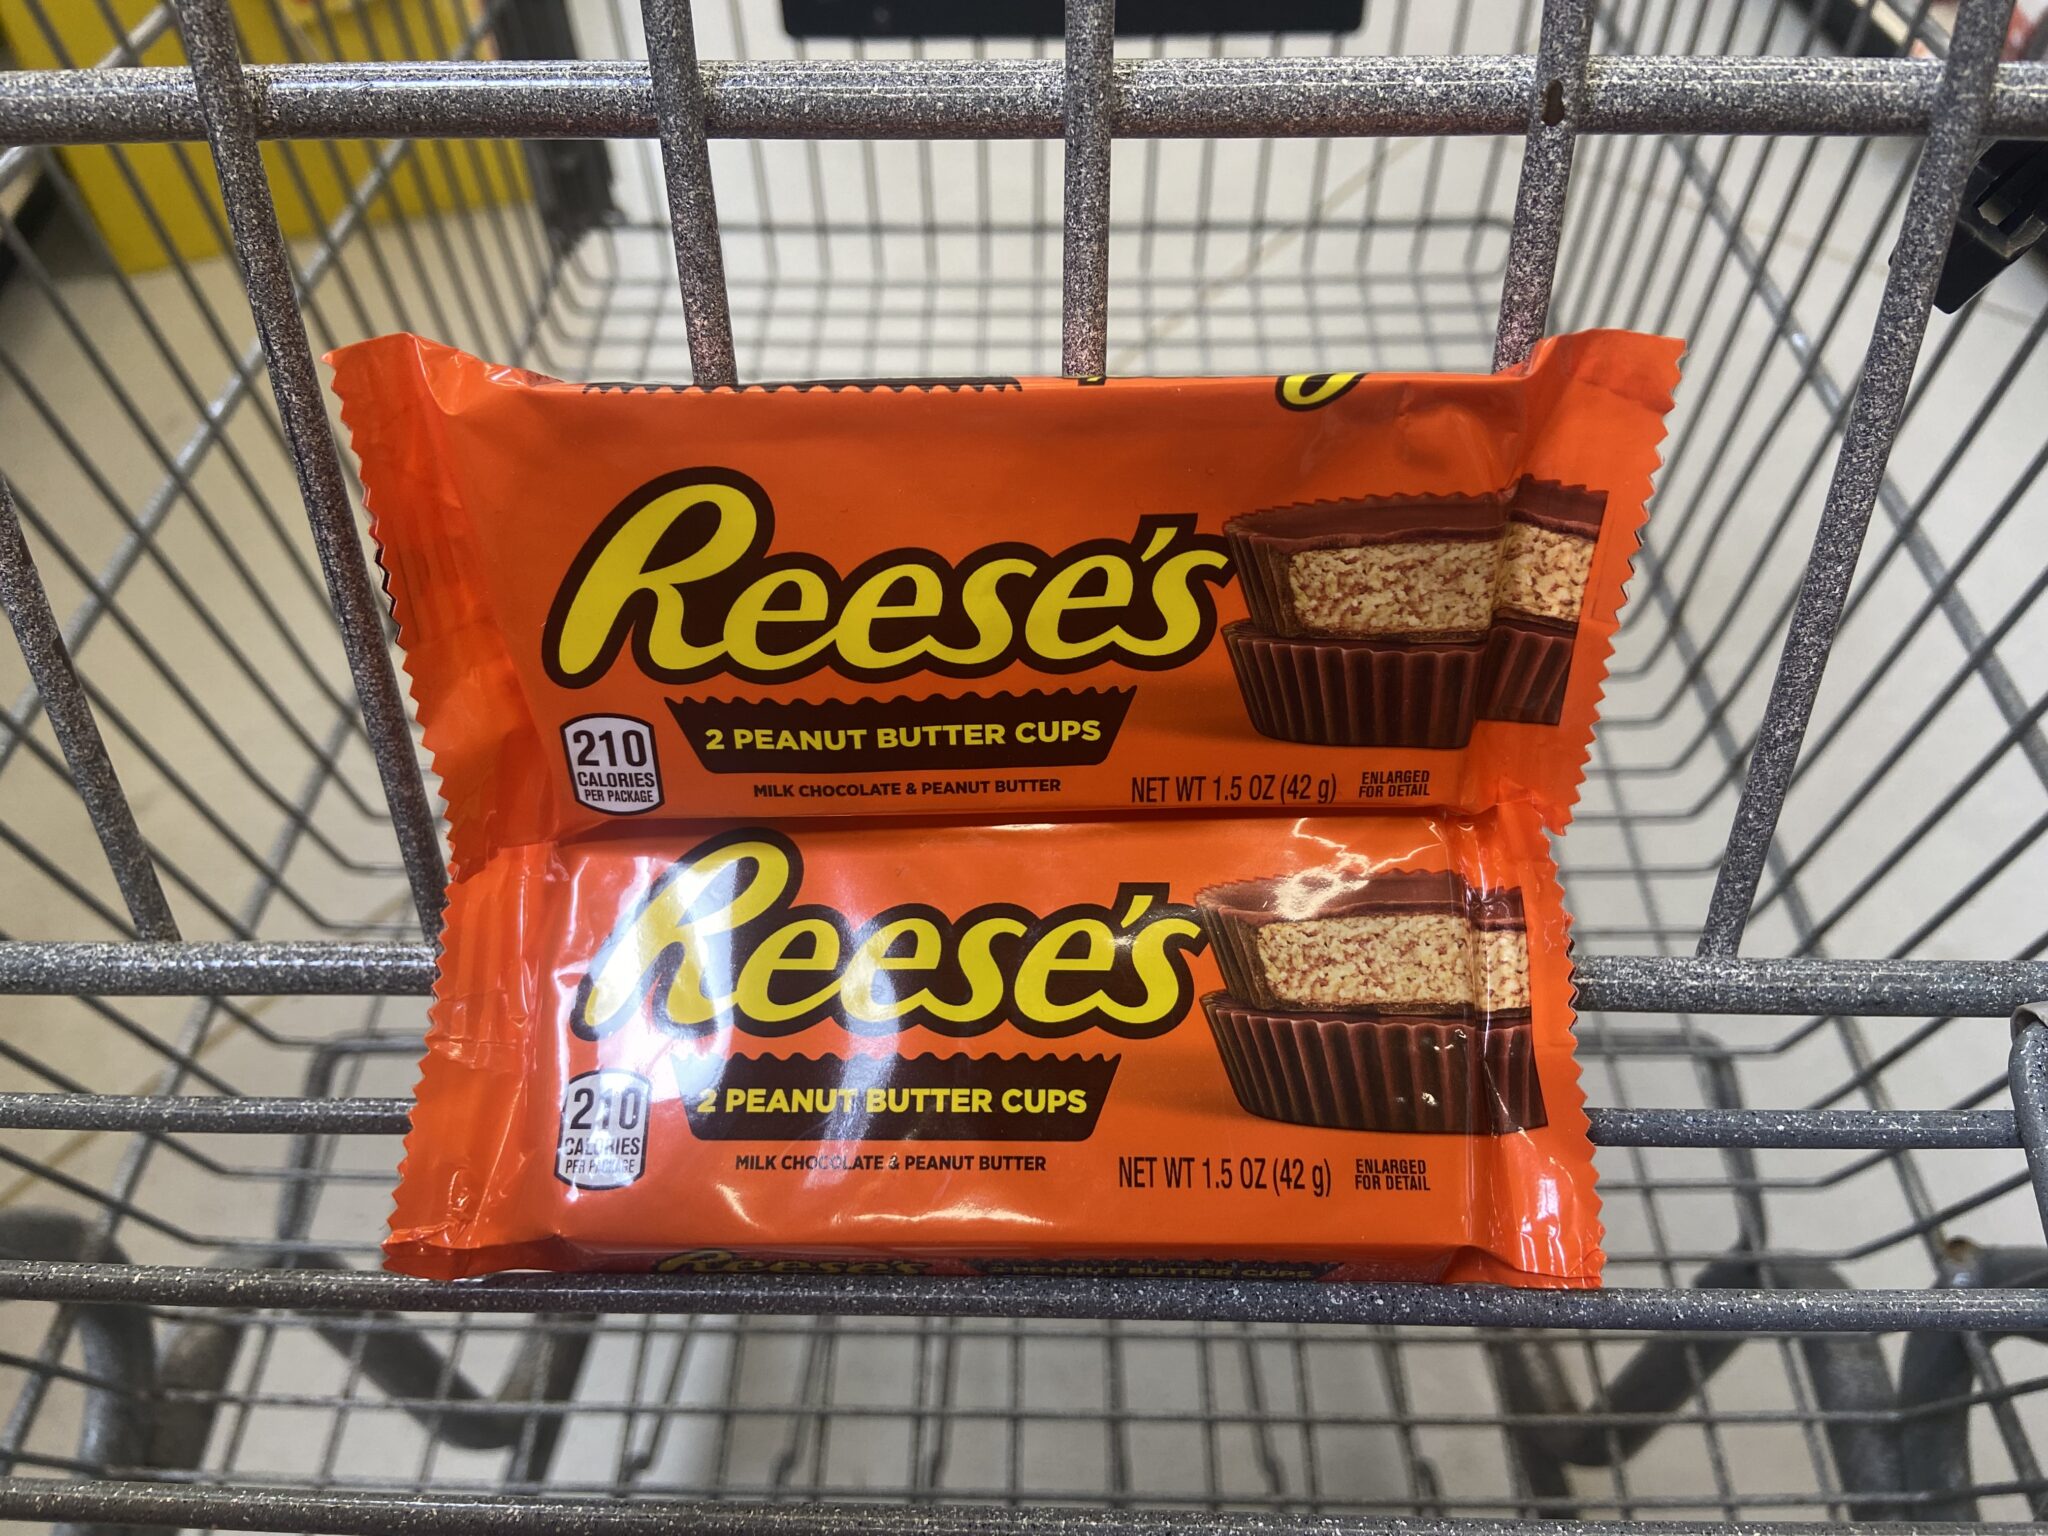 Giant: Reese’s Candy Bars JUST $0.83 Each Starting 3/31